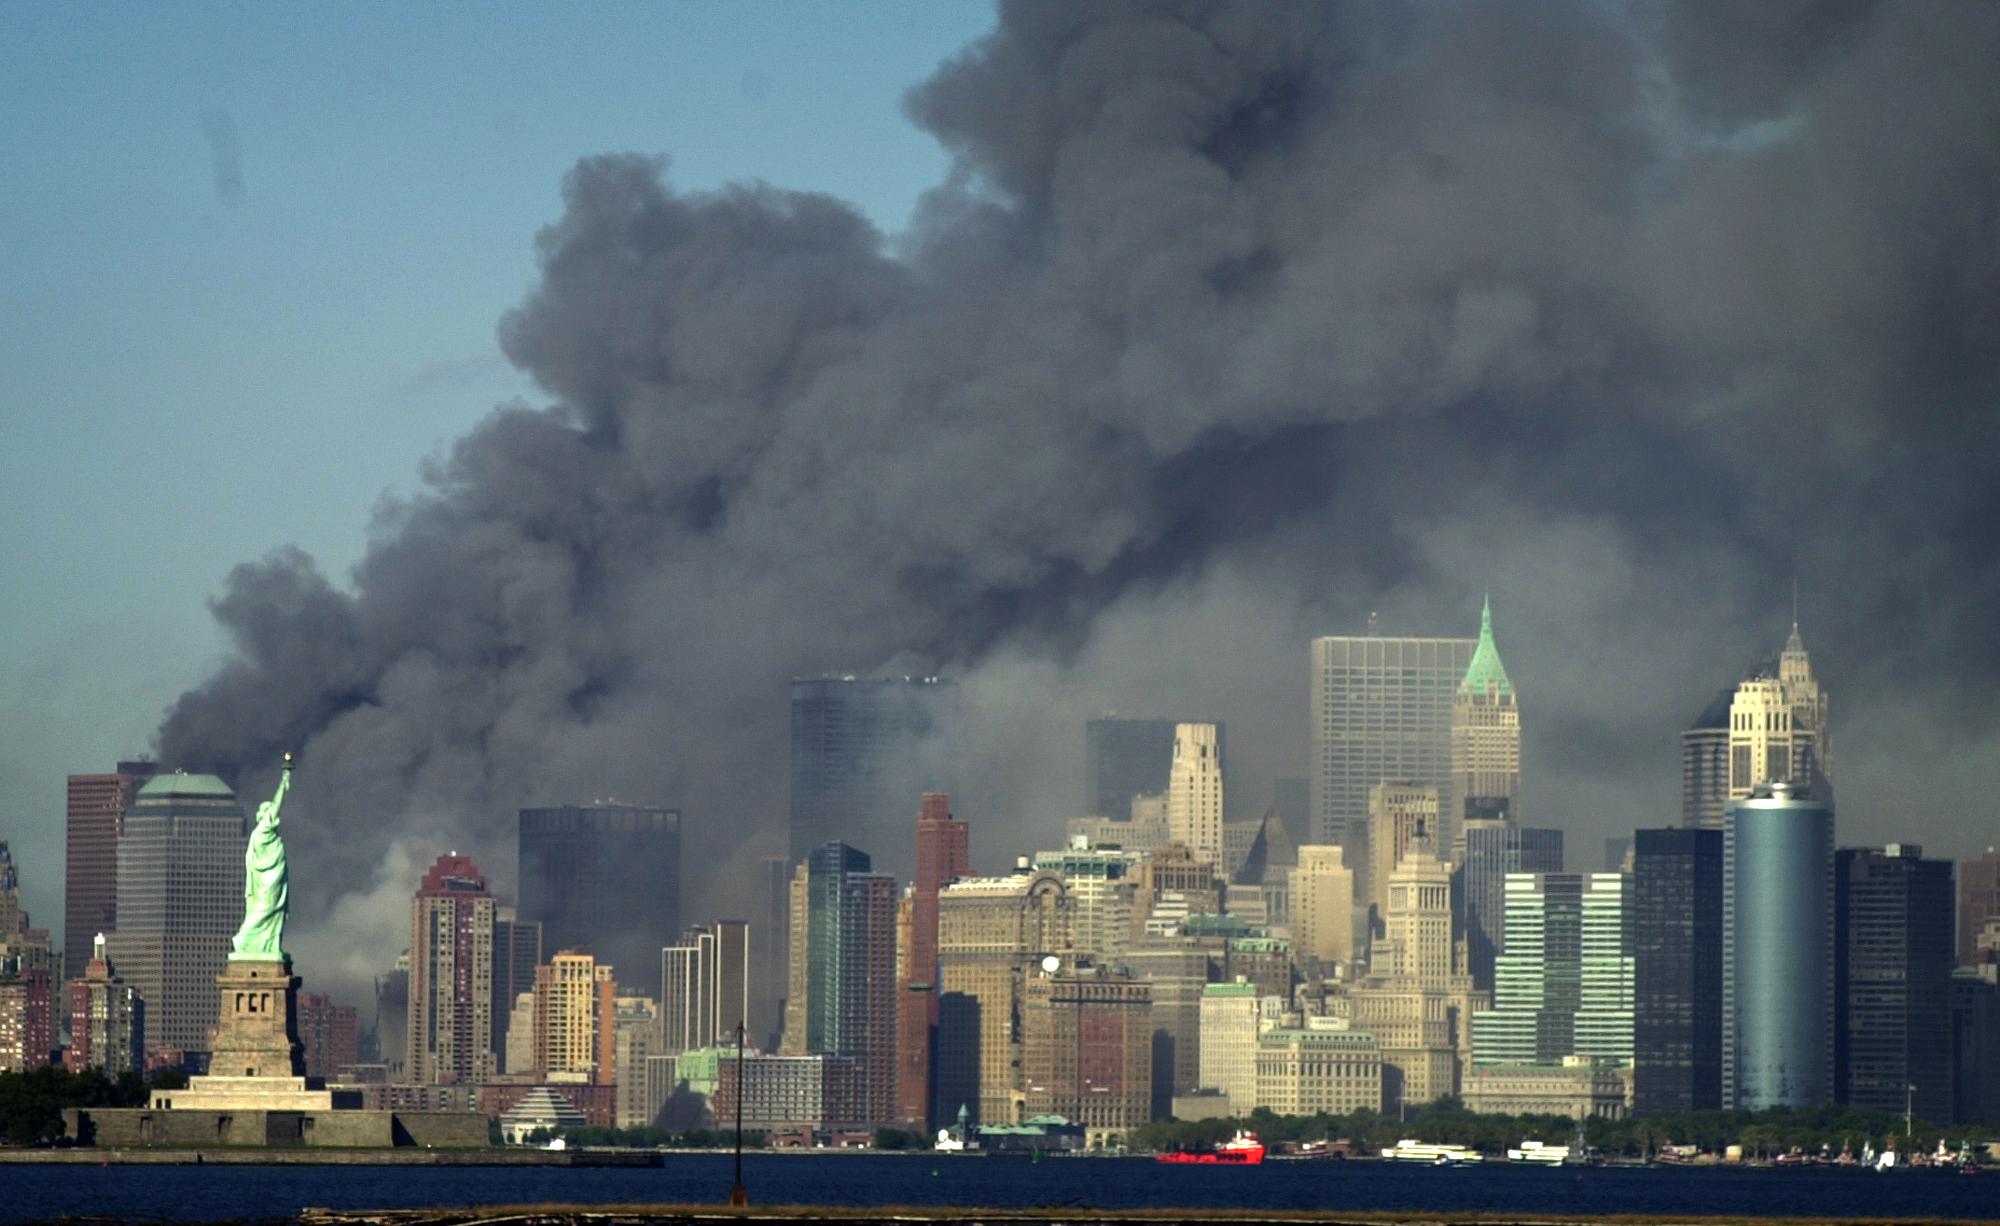 Thick smoke billows into the sky from the area behind the Statue of Liberty, lower left, where the World Trade Center was, on Tuesday, Sept. 11, 2001. (AP Photo/Daniel Hulshizer)